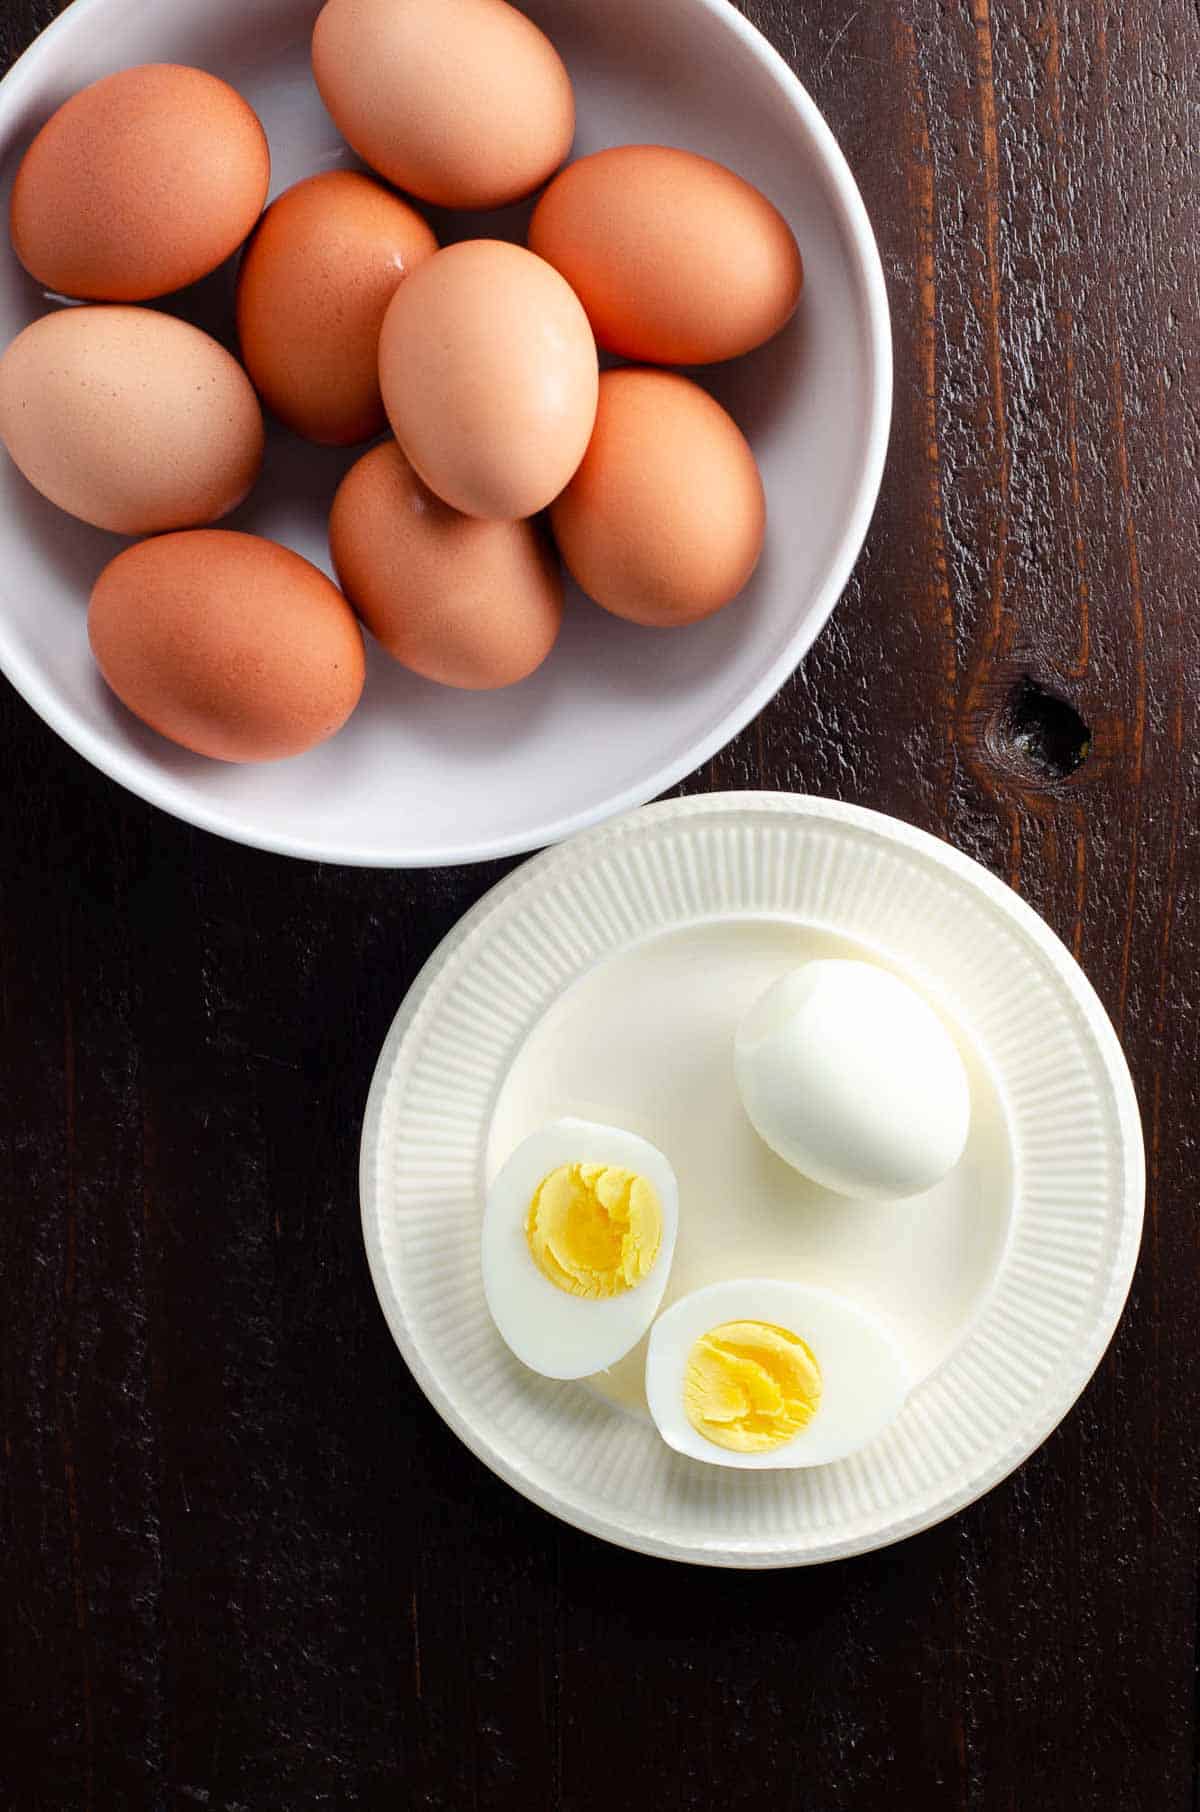 a bowl of hard boiled eggs in their shells, and a small plate with two peeled hard boiled eggs, one cut in half